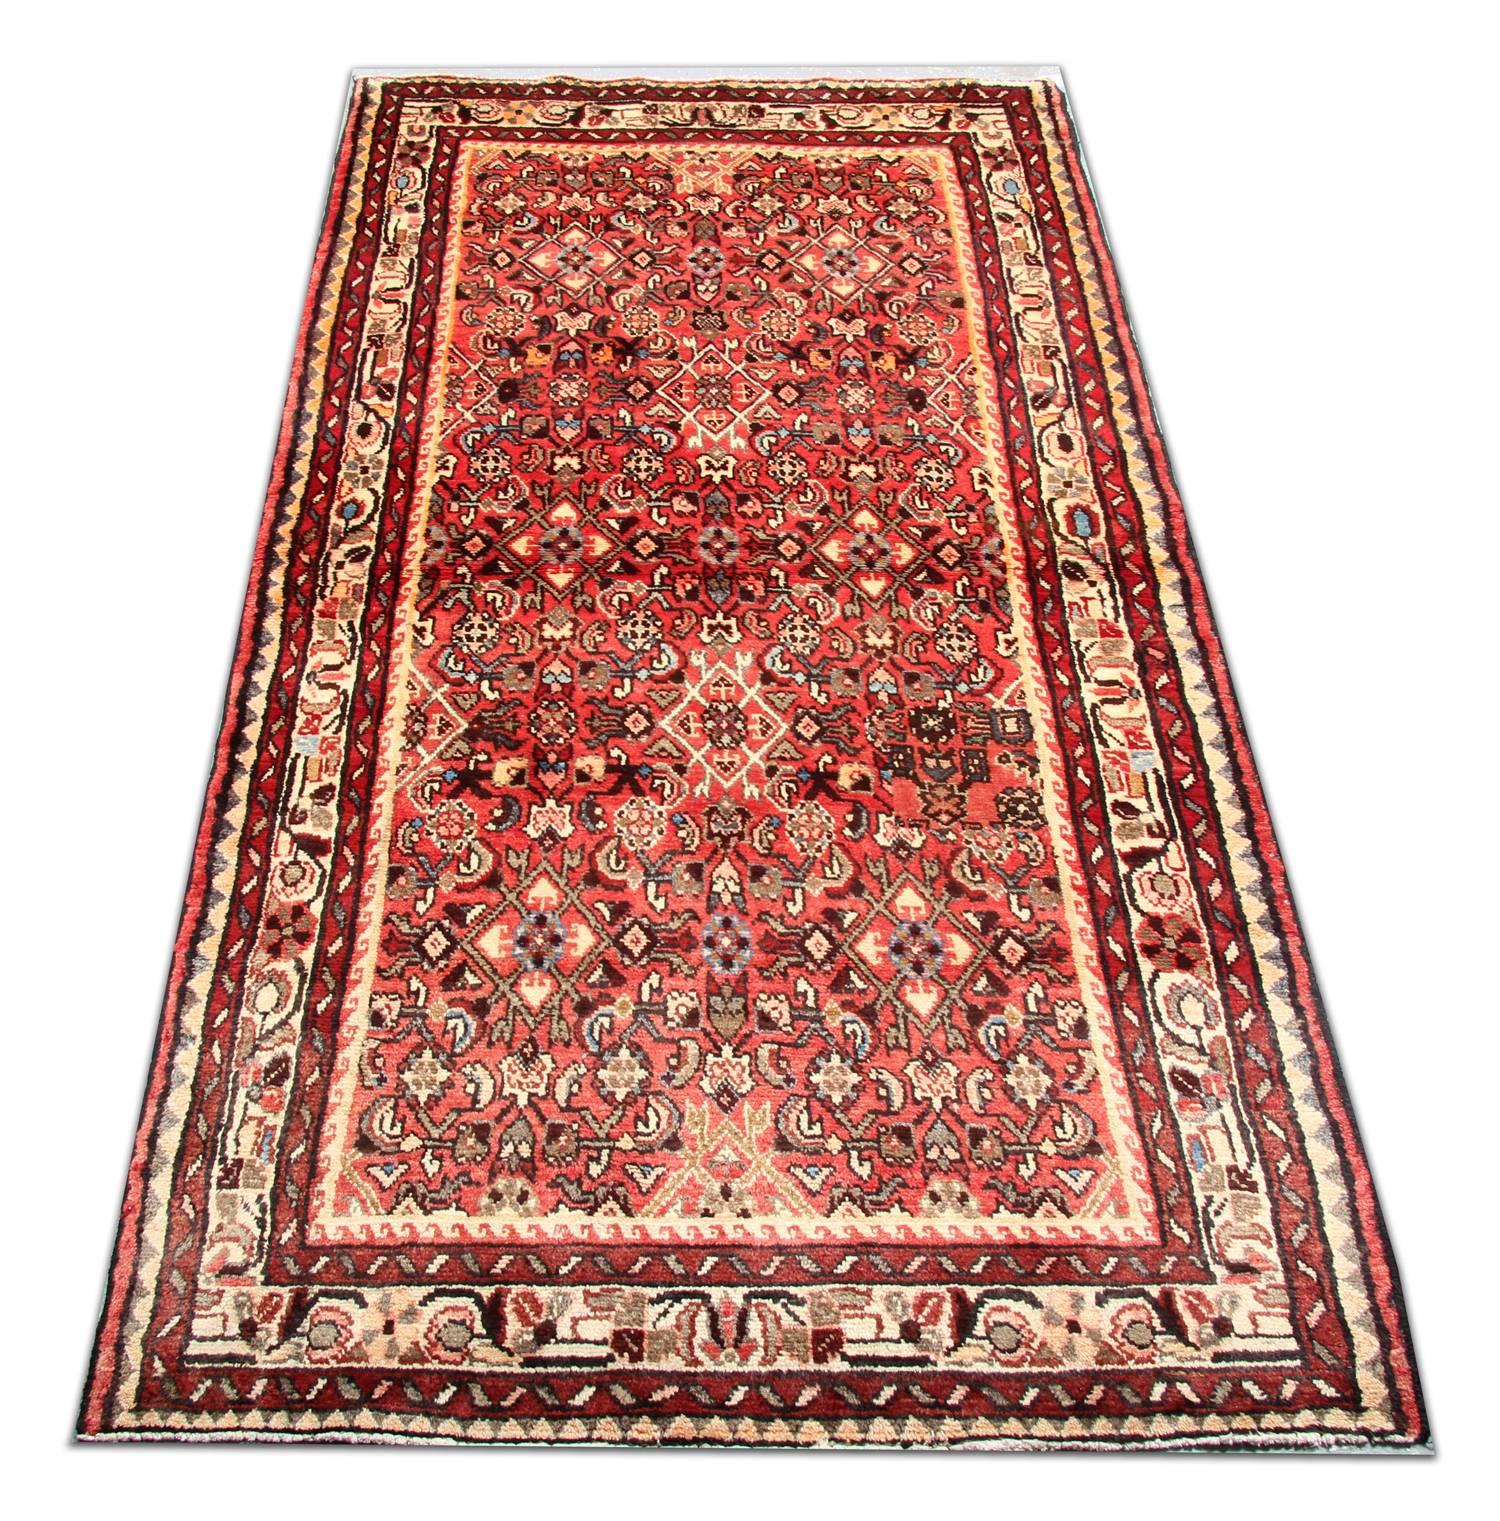 This harmonious wool rug has been woven with a fantastic all-over design. Featuring a highly-decorative repeat pattern central design woven in colors of orange, rust and brown accent colors. This rug would make a perfect addition to any home.